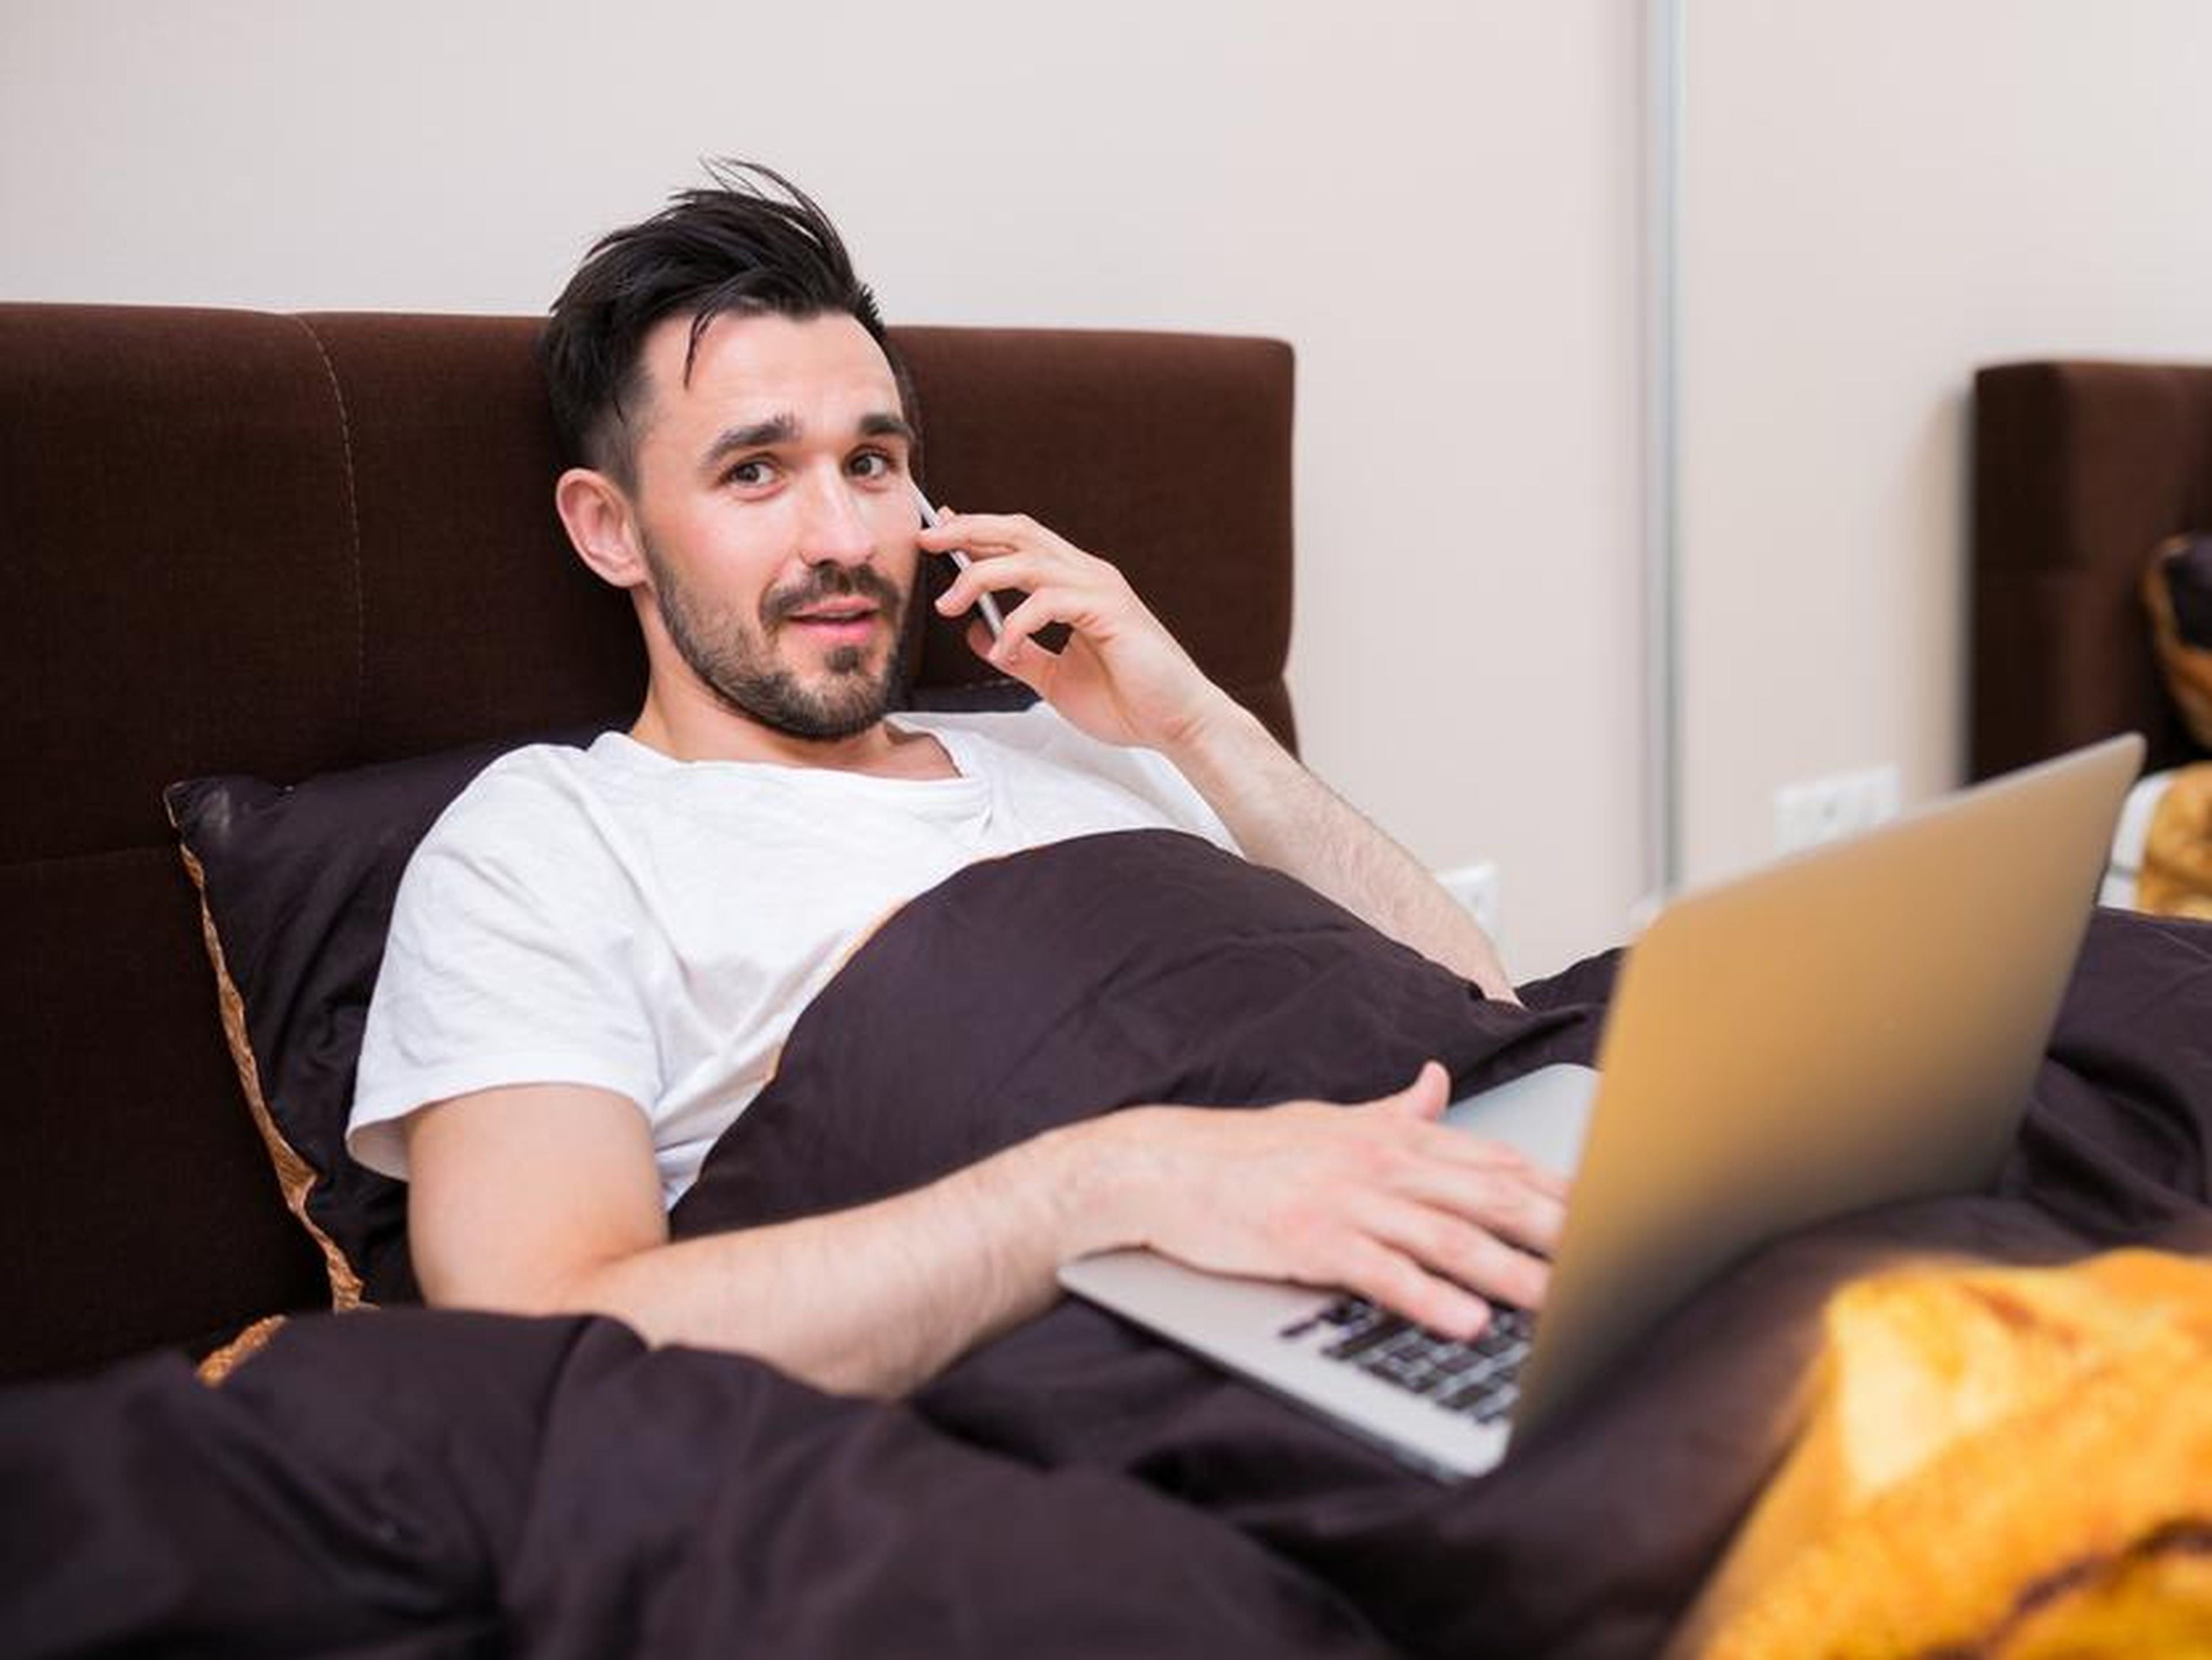 And, with 70% of professionals telecommuting at least once a week according to global workplace corporation IWG, employees are set to only continue to challenge the boundaries of work dress. After all, no one's going to see that